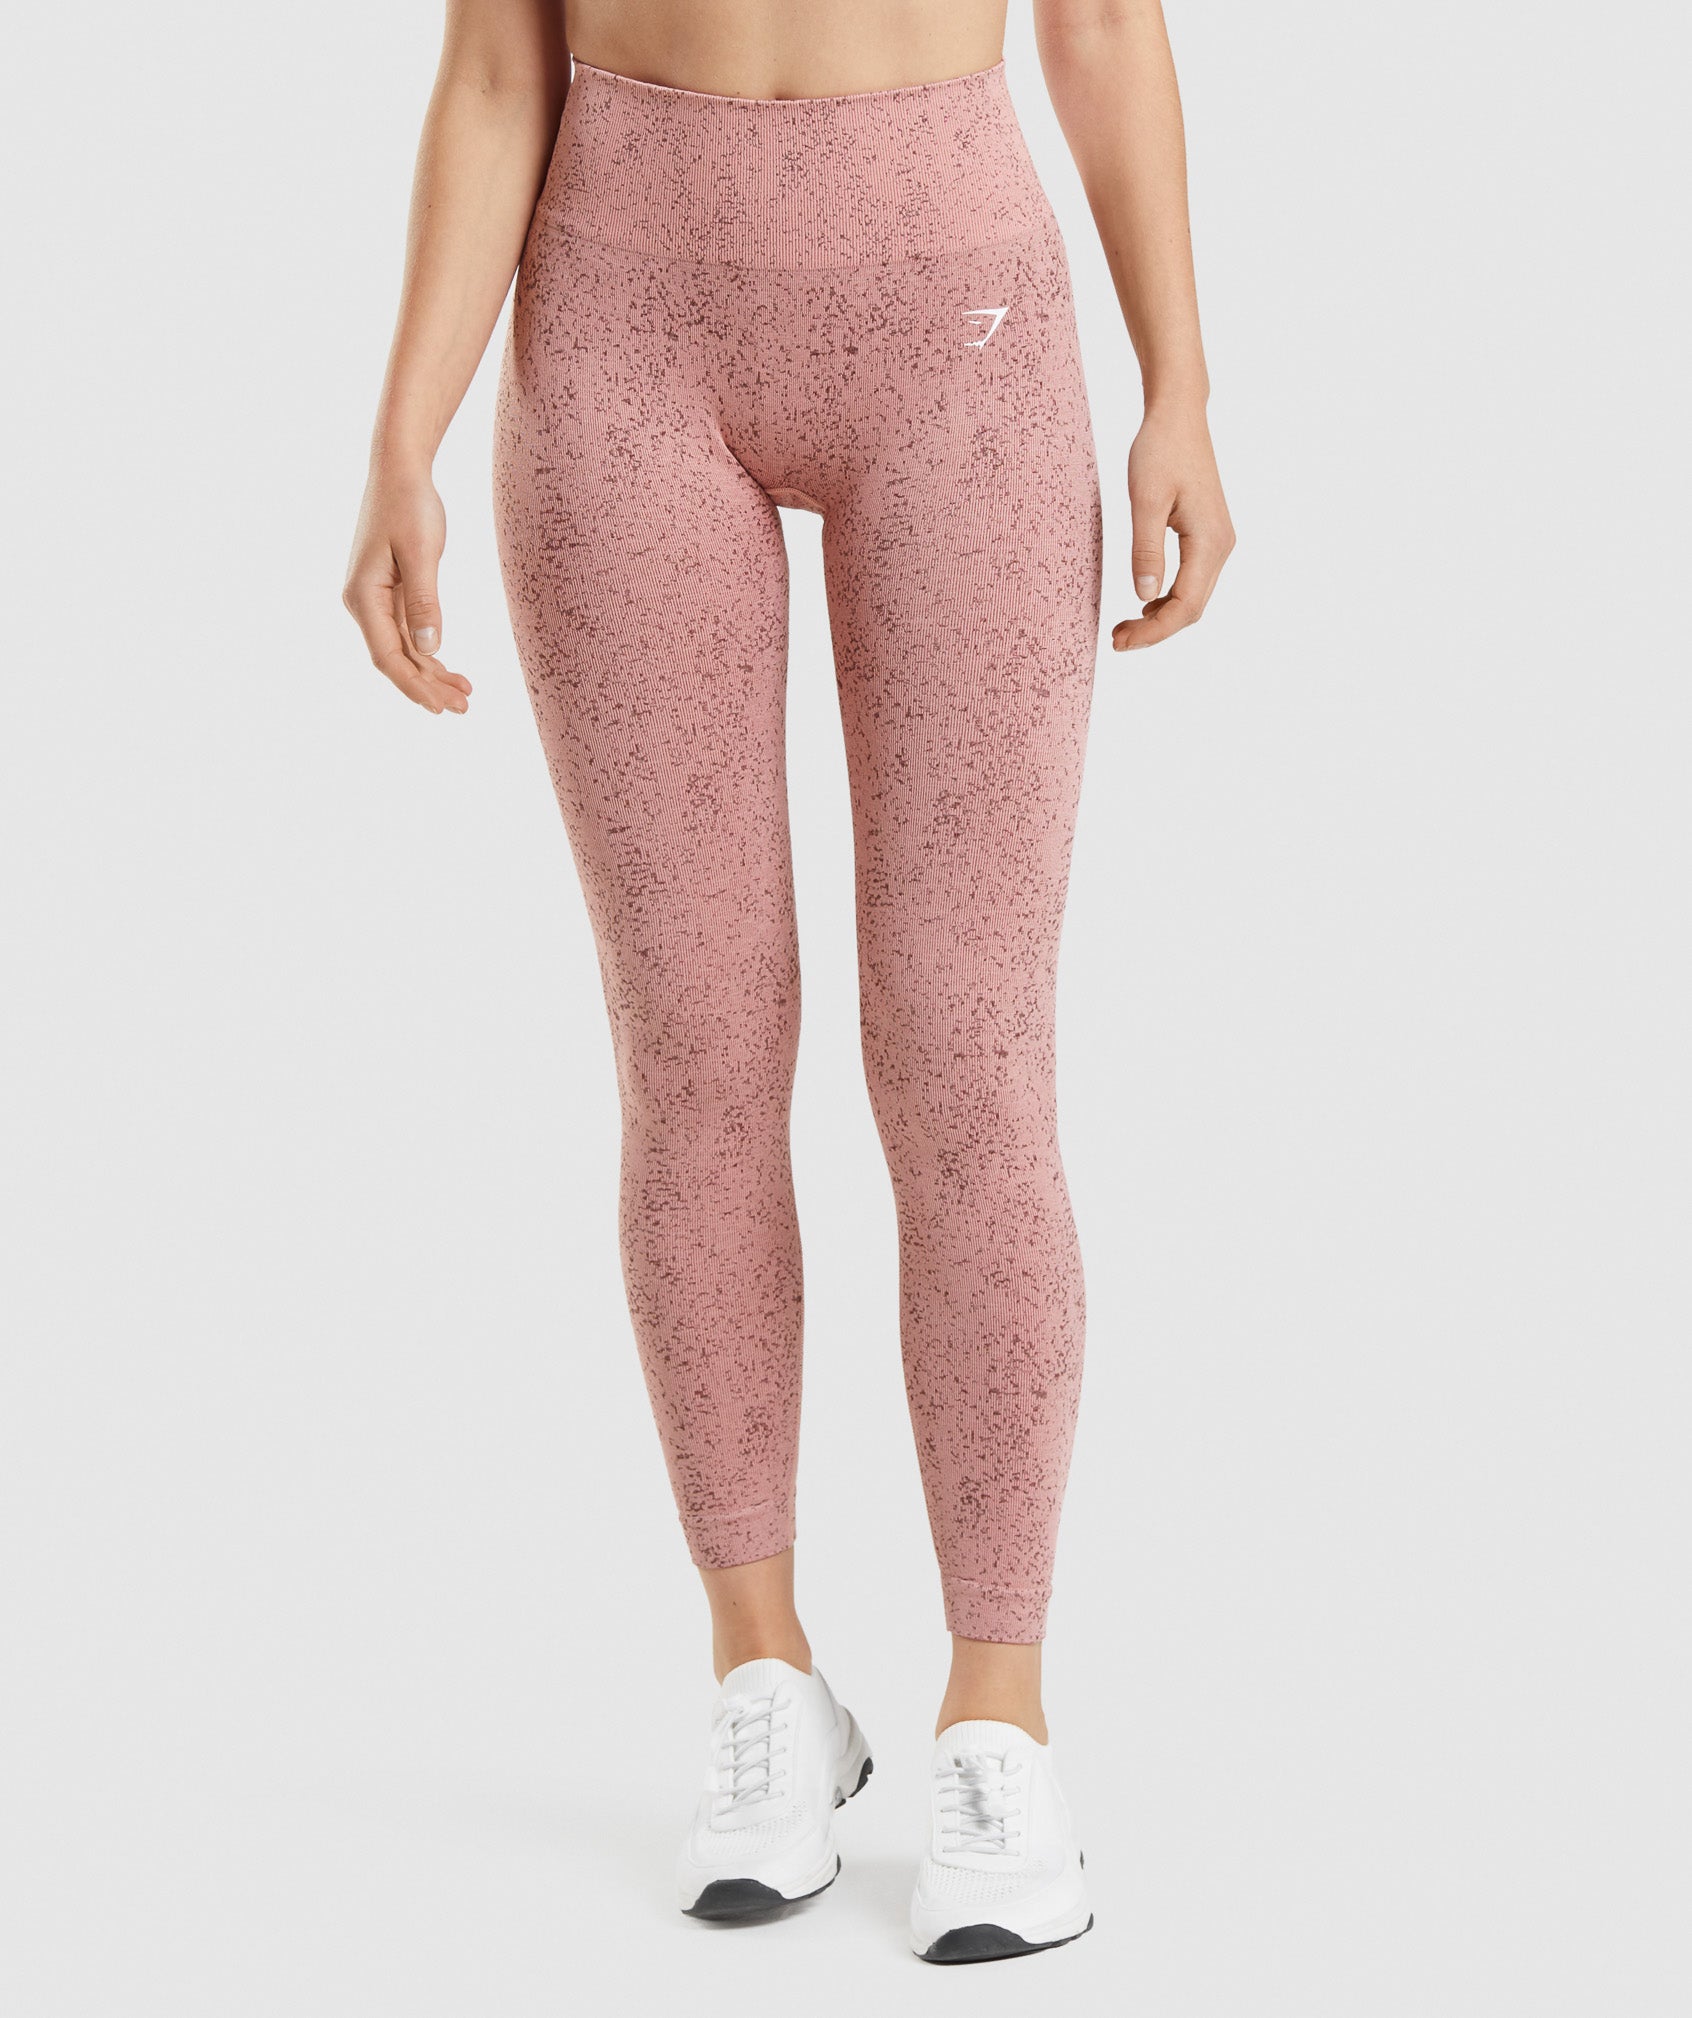 Gymshark Adapt Ombre Seamless Leggings - Pink/Red